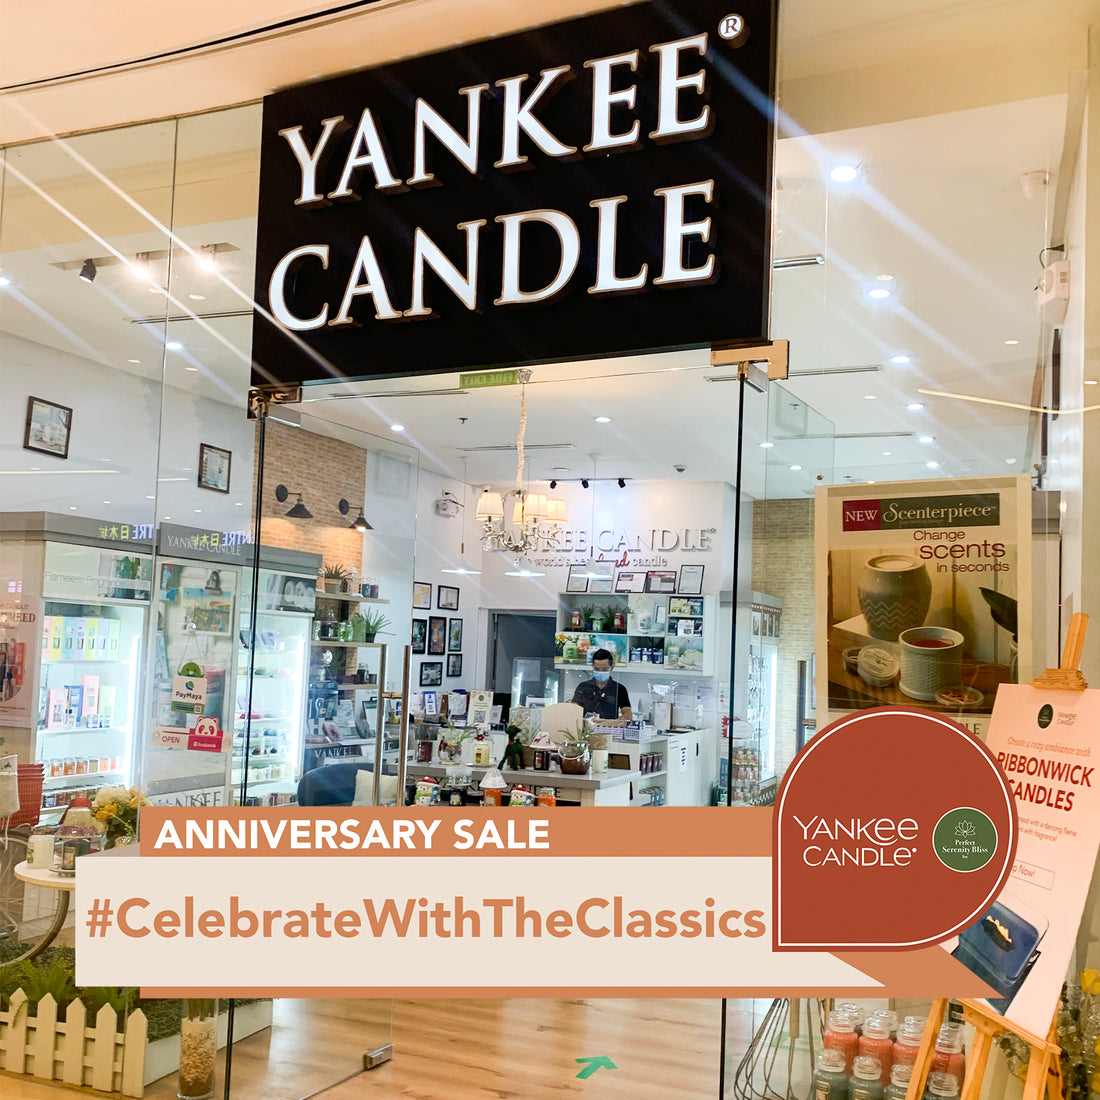 Get massive deals and discounts on your favorite Yankee Candle items at our Anniversary In-Store Sale